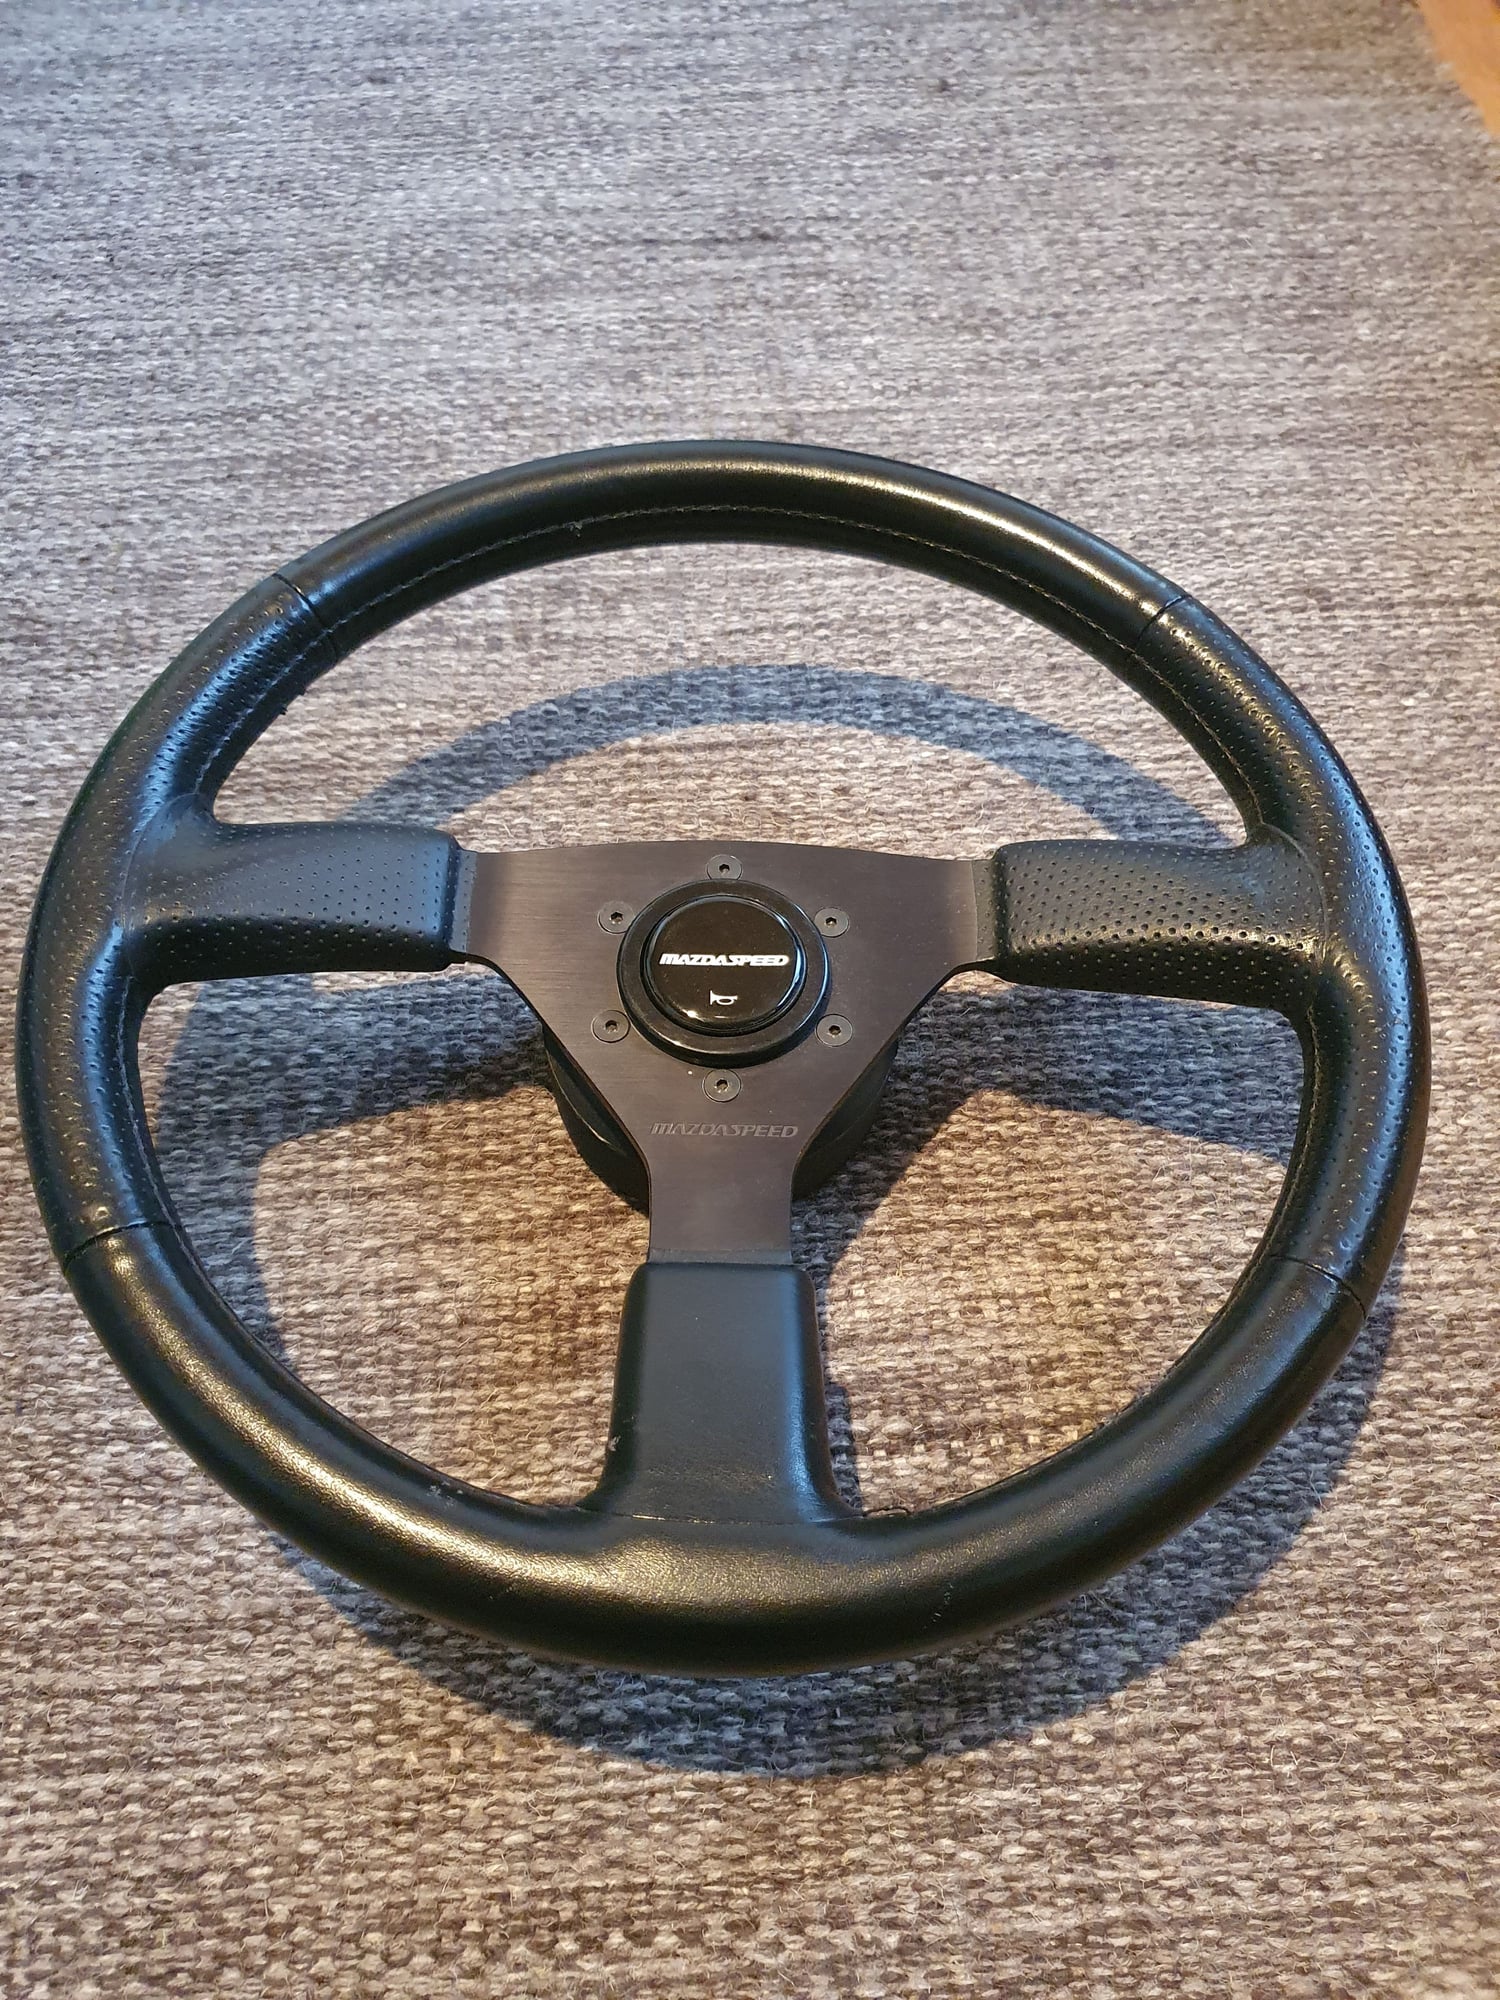 Interior/Upholstery - MazdaSpeed perforated steering wheel w/black horn button & boss x2 - Used - 0  All Models - Bergen, Norway